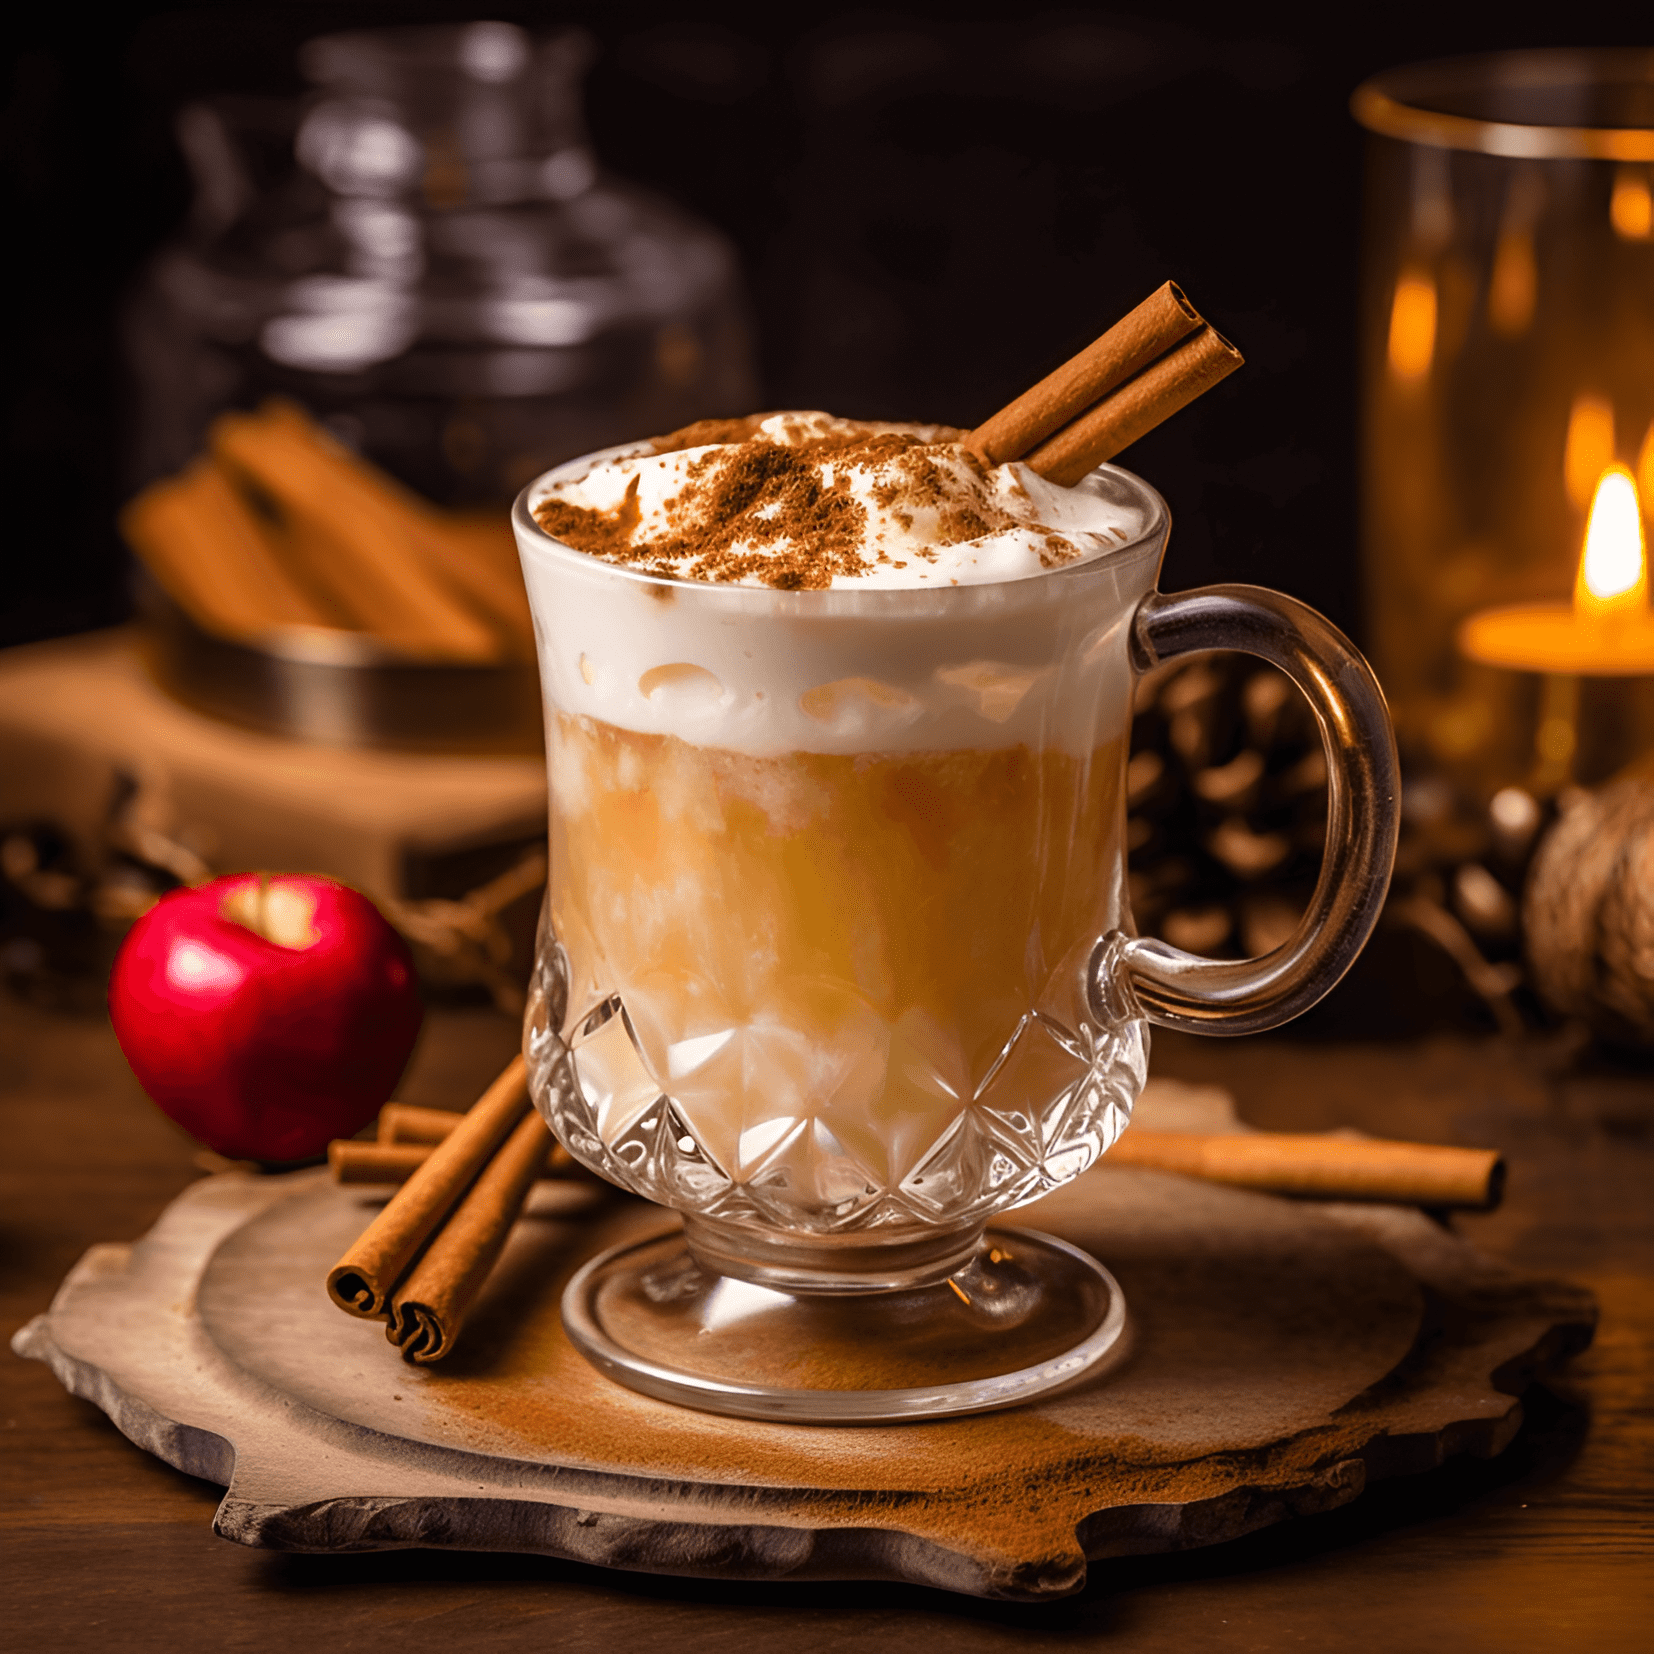 Hot Apple Pie Cocktail Recipe - The Hot Apple Pie cocktail has a sweet, fruity taste with a hint of warmth from the spices. The apple cider and apple brandy give it a strong apple flavor, while the cinnamon and nutmeg add a subtle spiciness. The whipped cream on top adds a creamy, smooth texture to the drink.